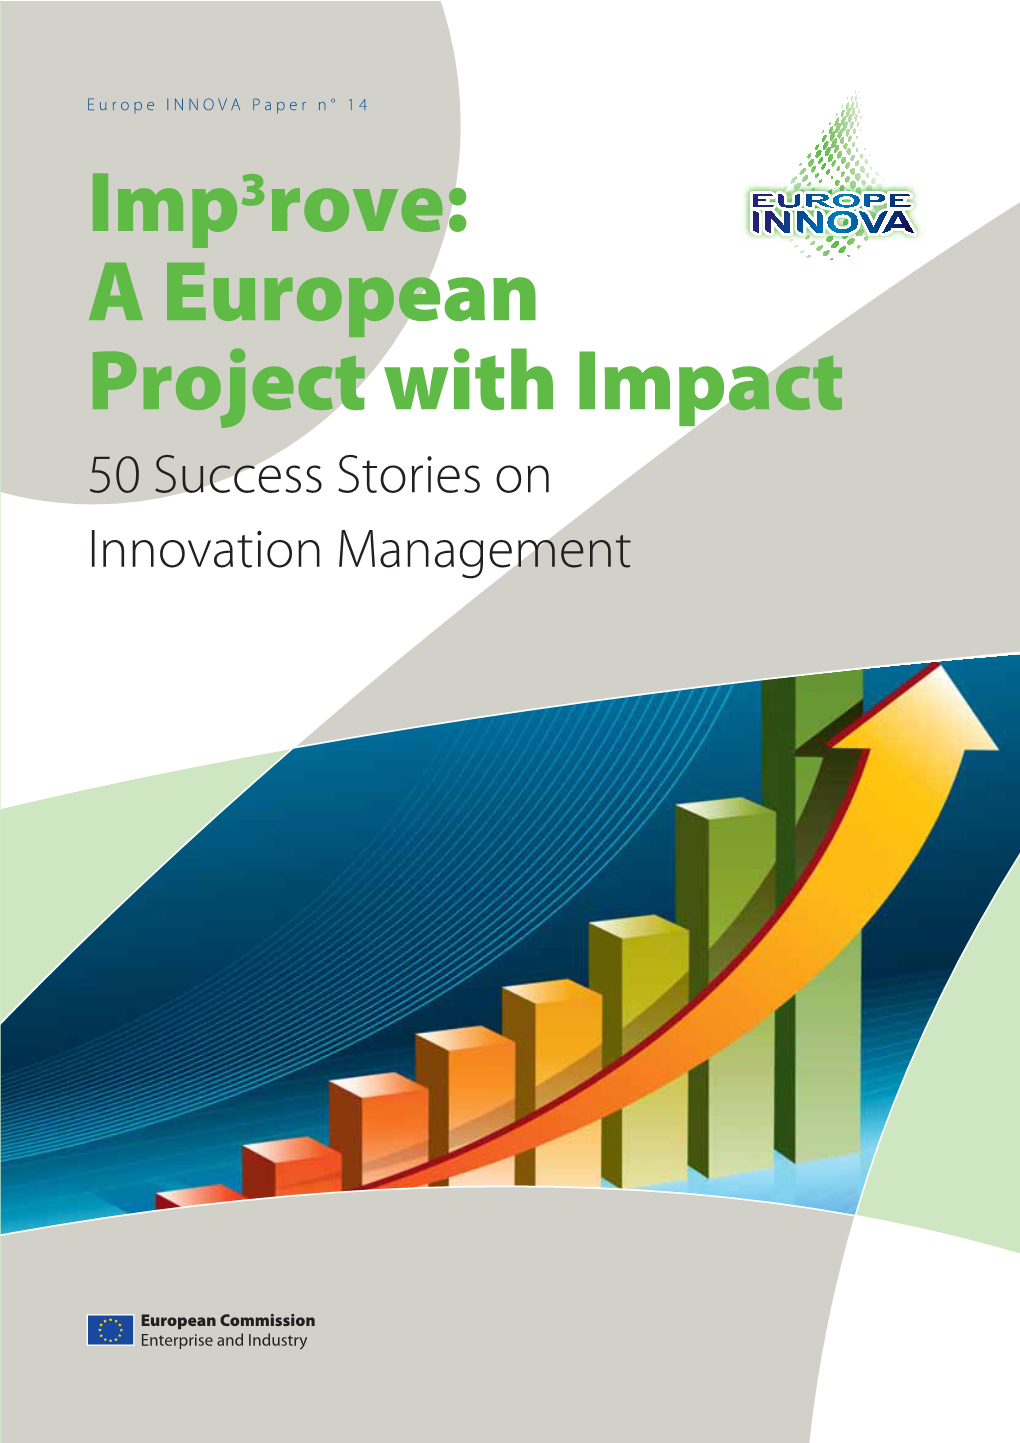 A European Project with Impact 50 Success Stories on Innovation Management